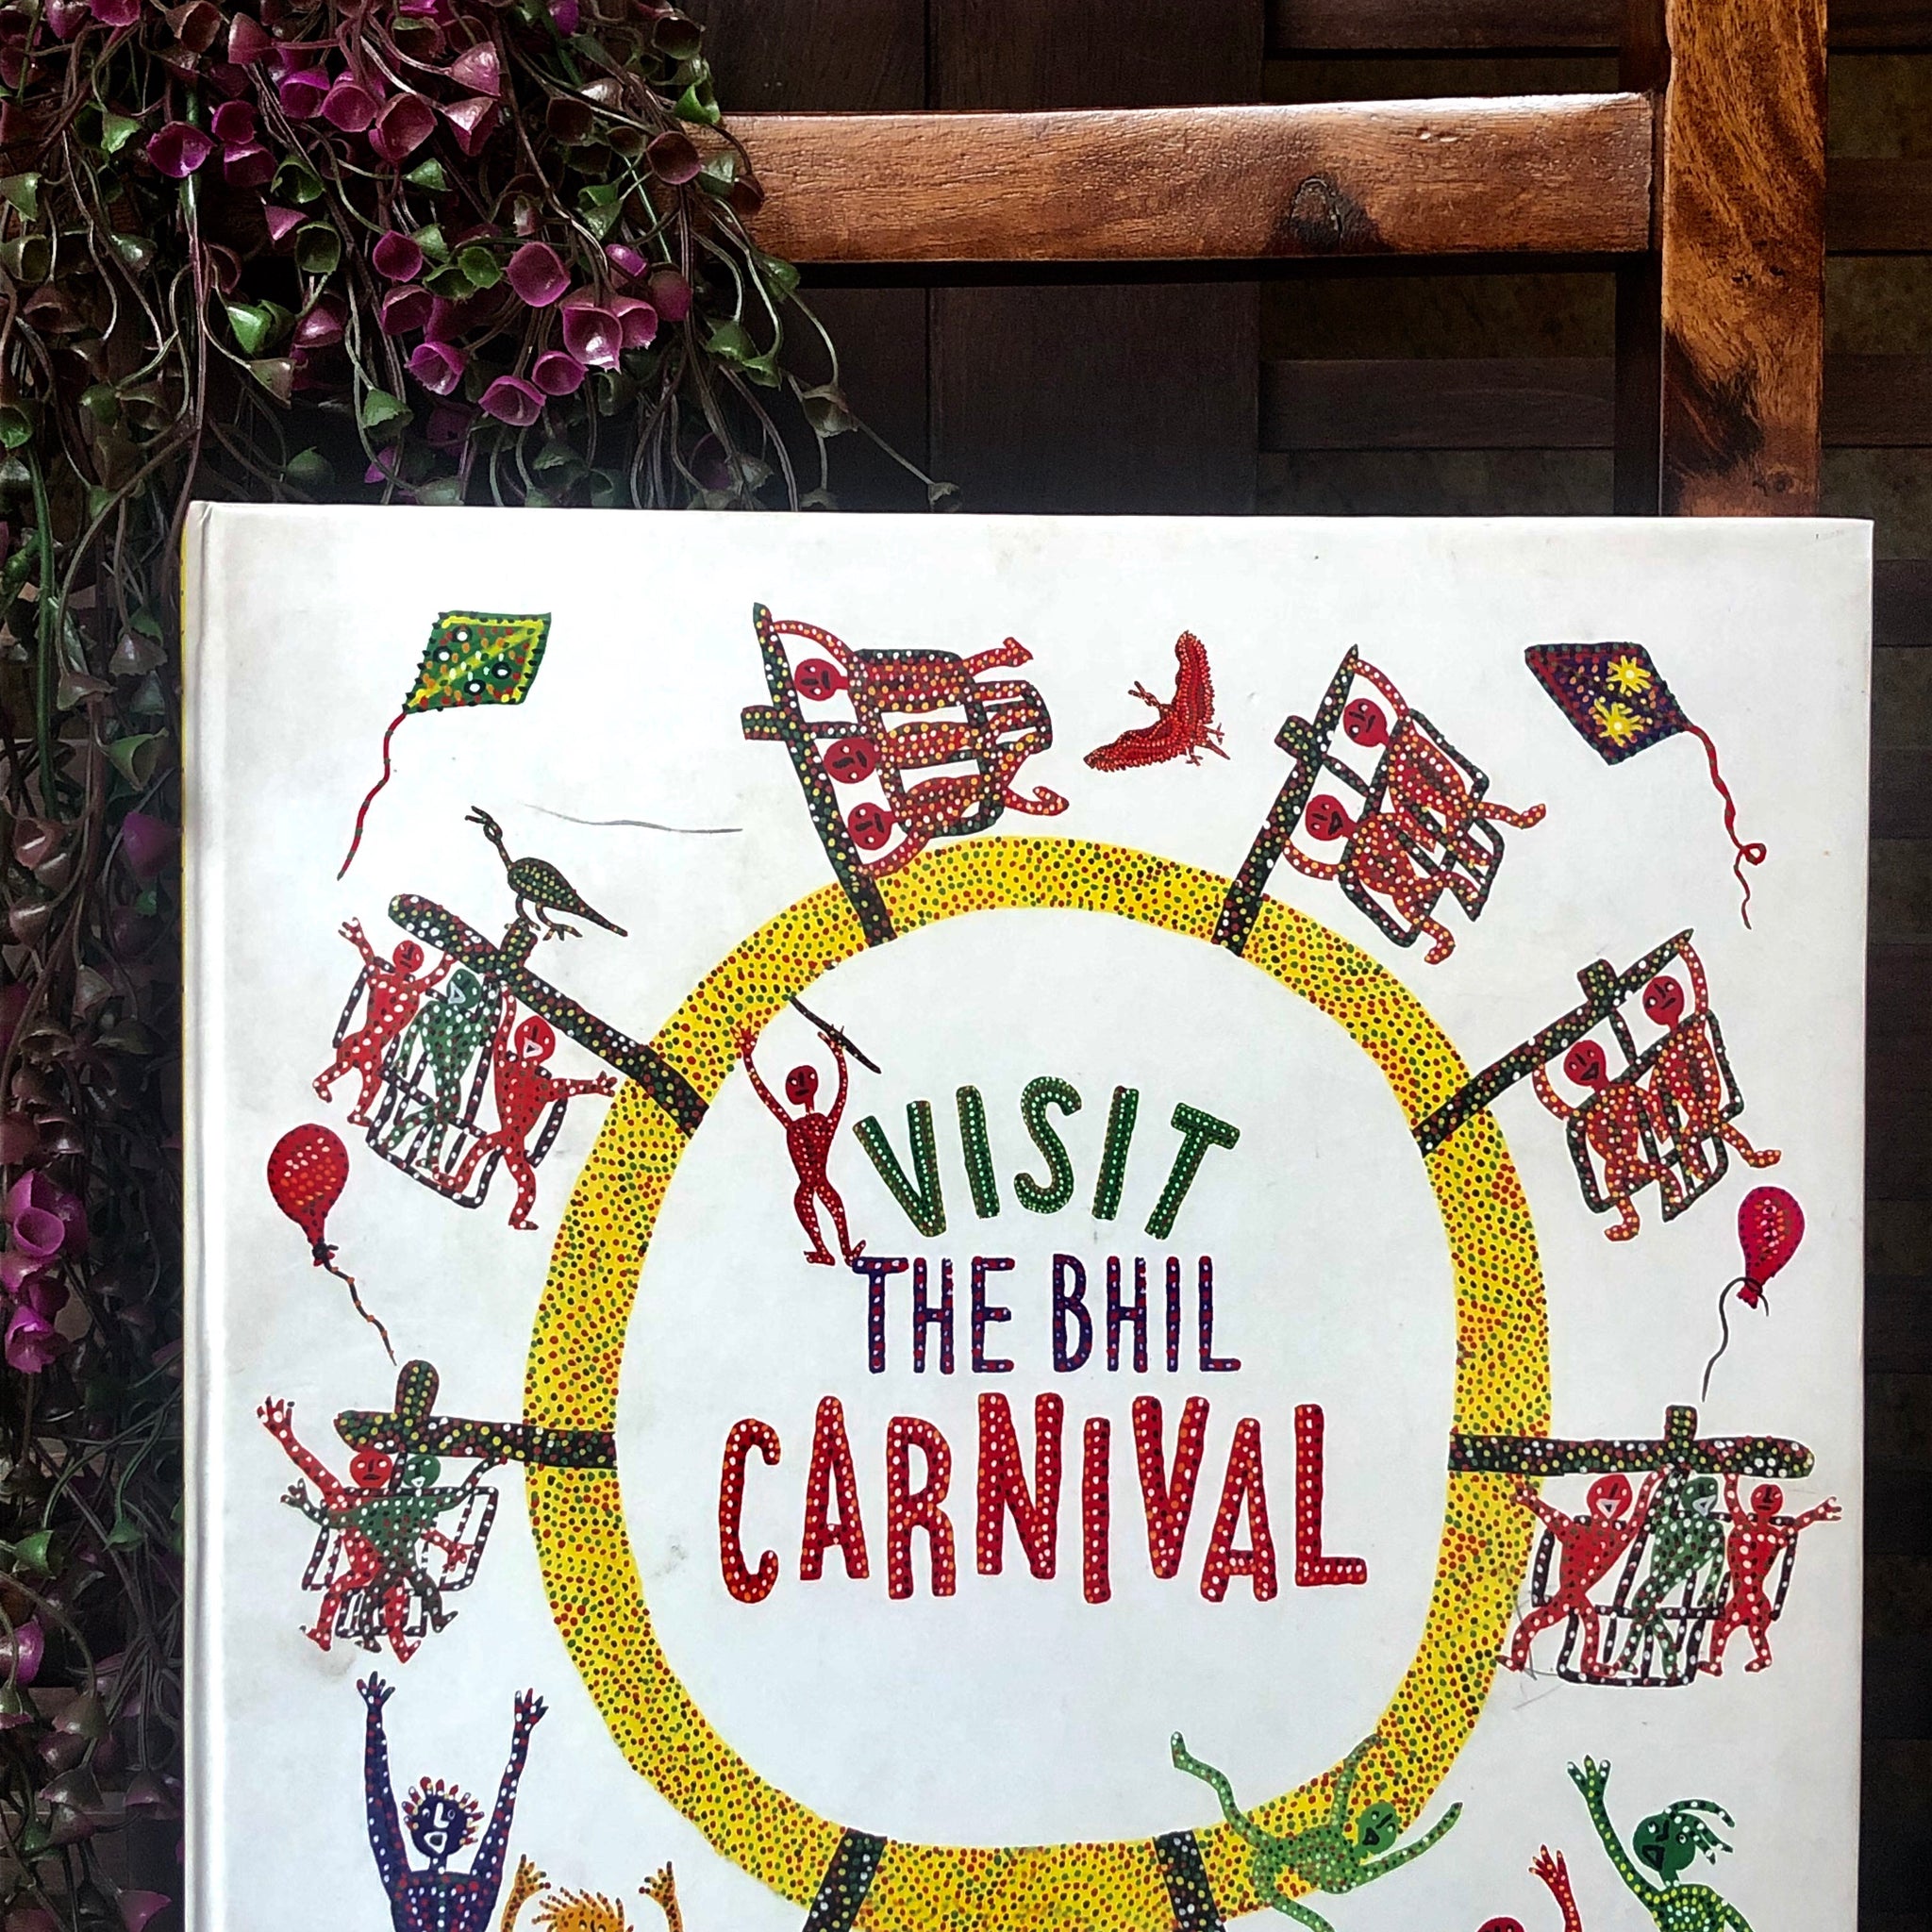 book bliss - visit the bhil carnival